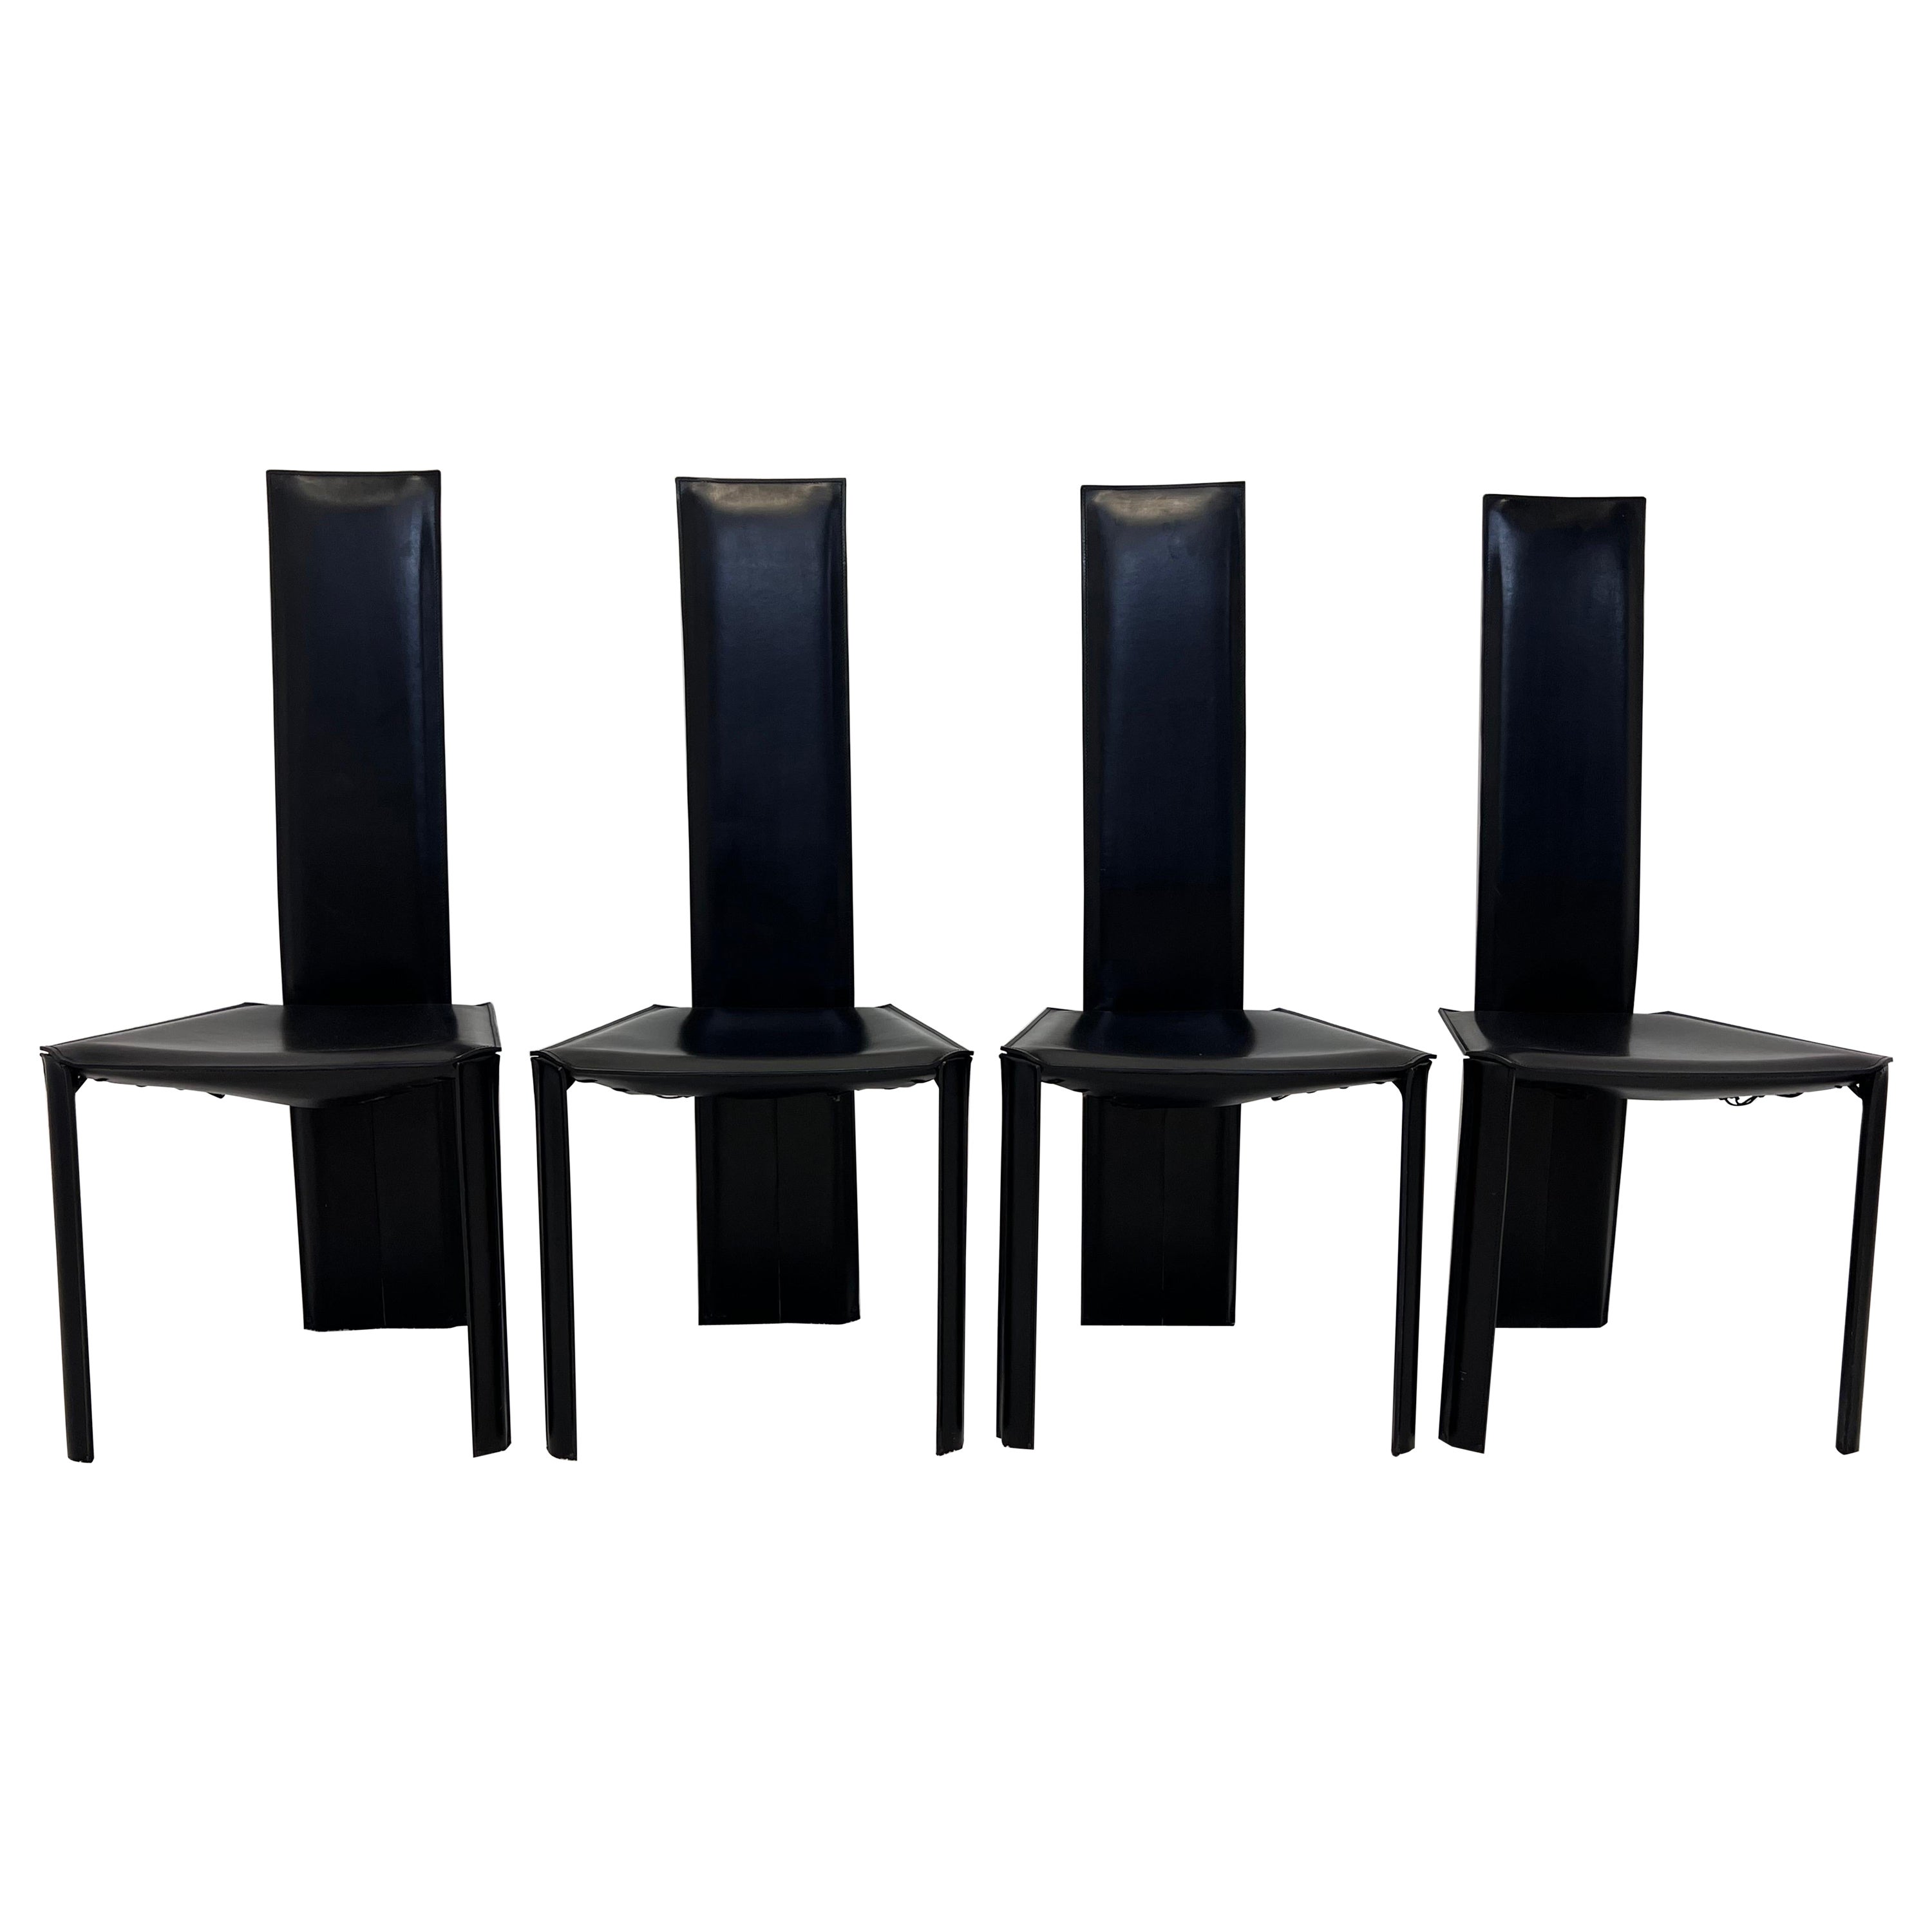 Mid-Century Brazilian Modern De Couro Black Leather Dining Chairs - Set of Four For Sale